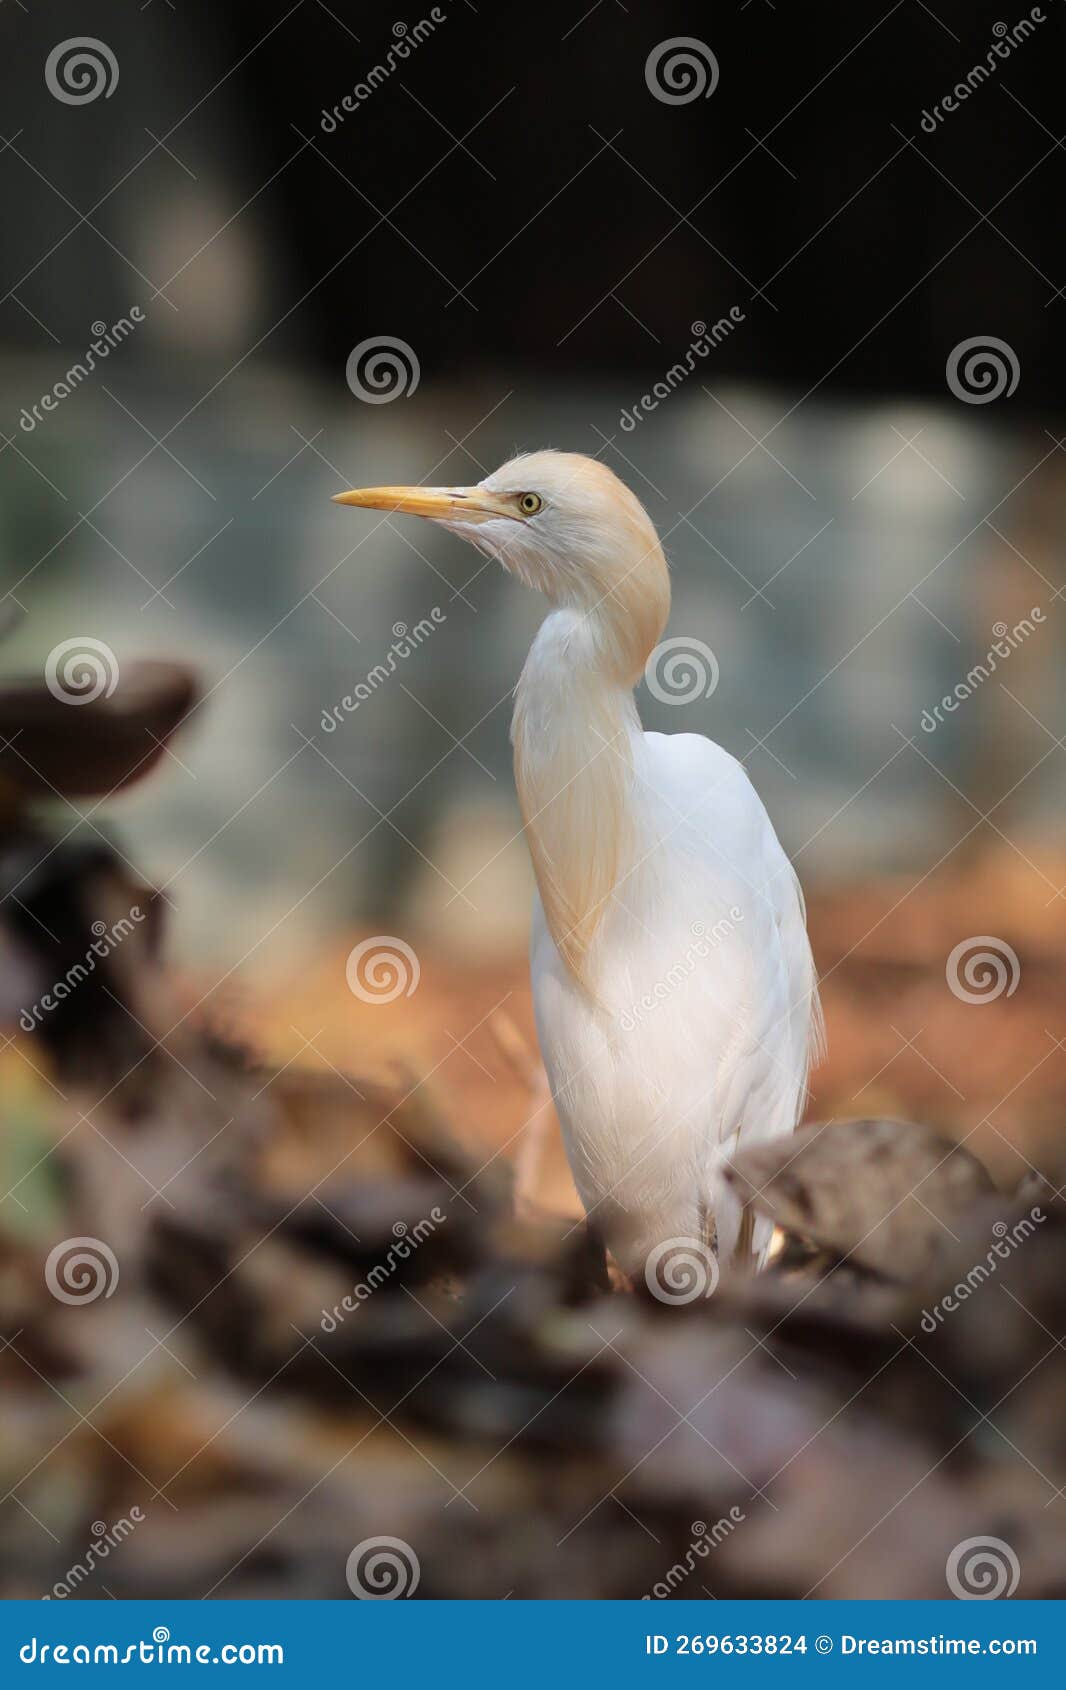 elegant and poised heron with white plumage.